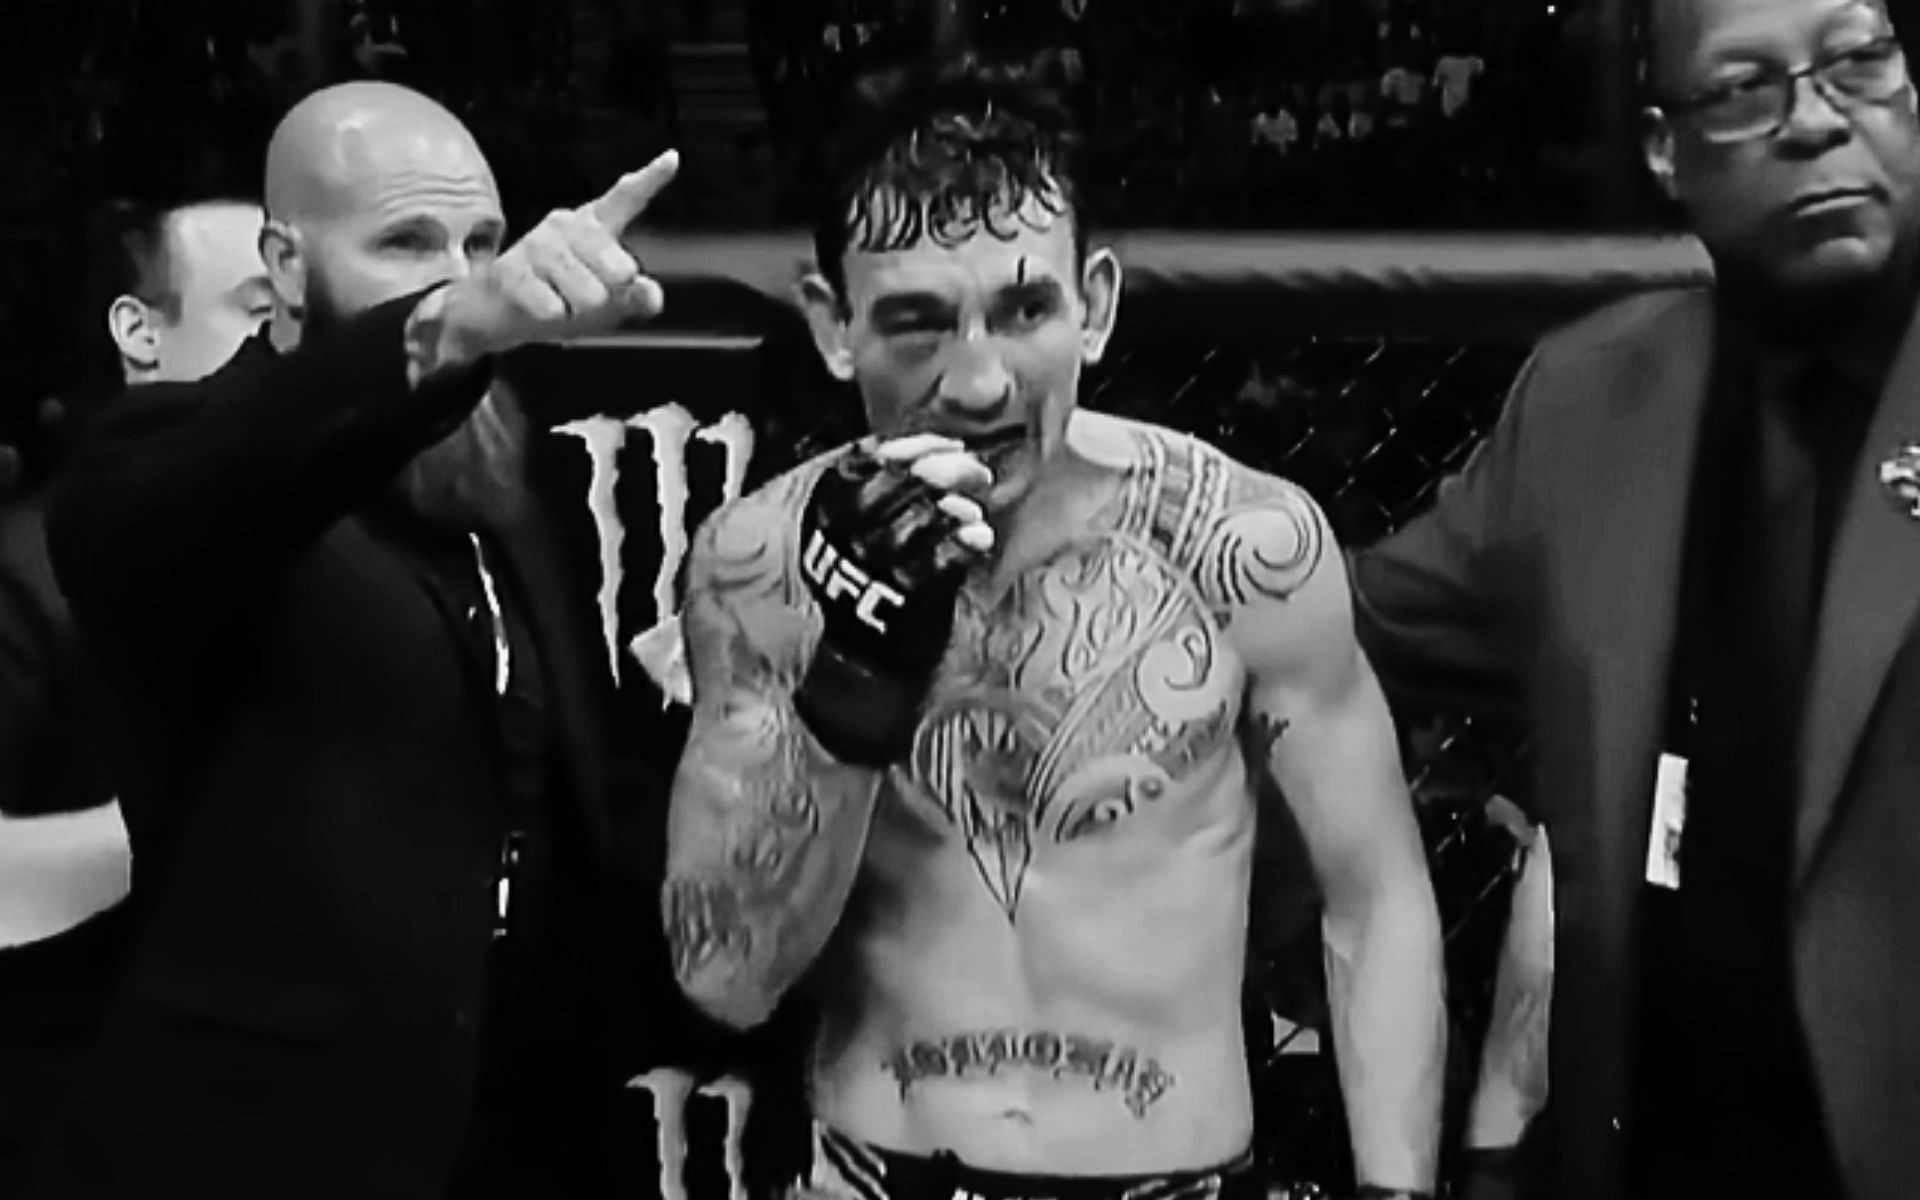 Max Holloway got cut open on his left eye brow at UFC 276 [Image courtesy @ufc on YouTube]